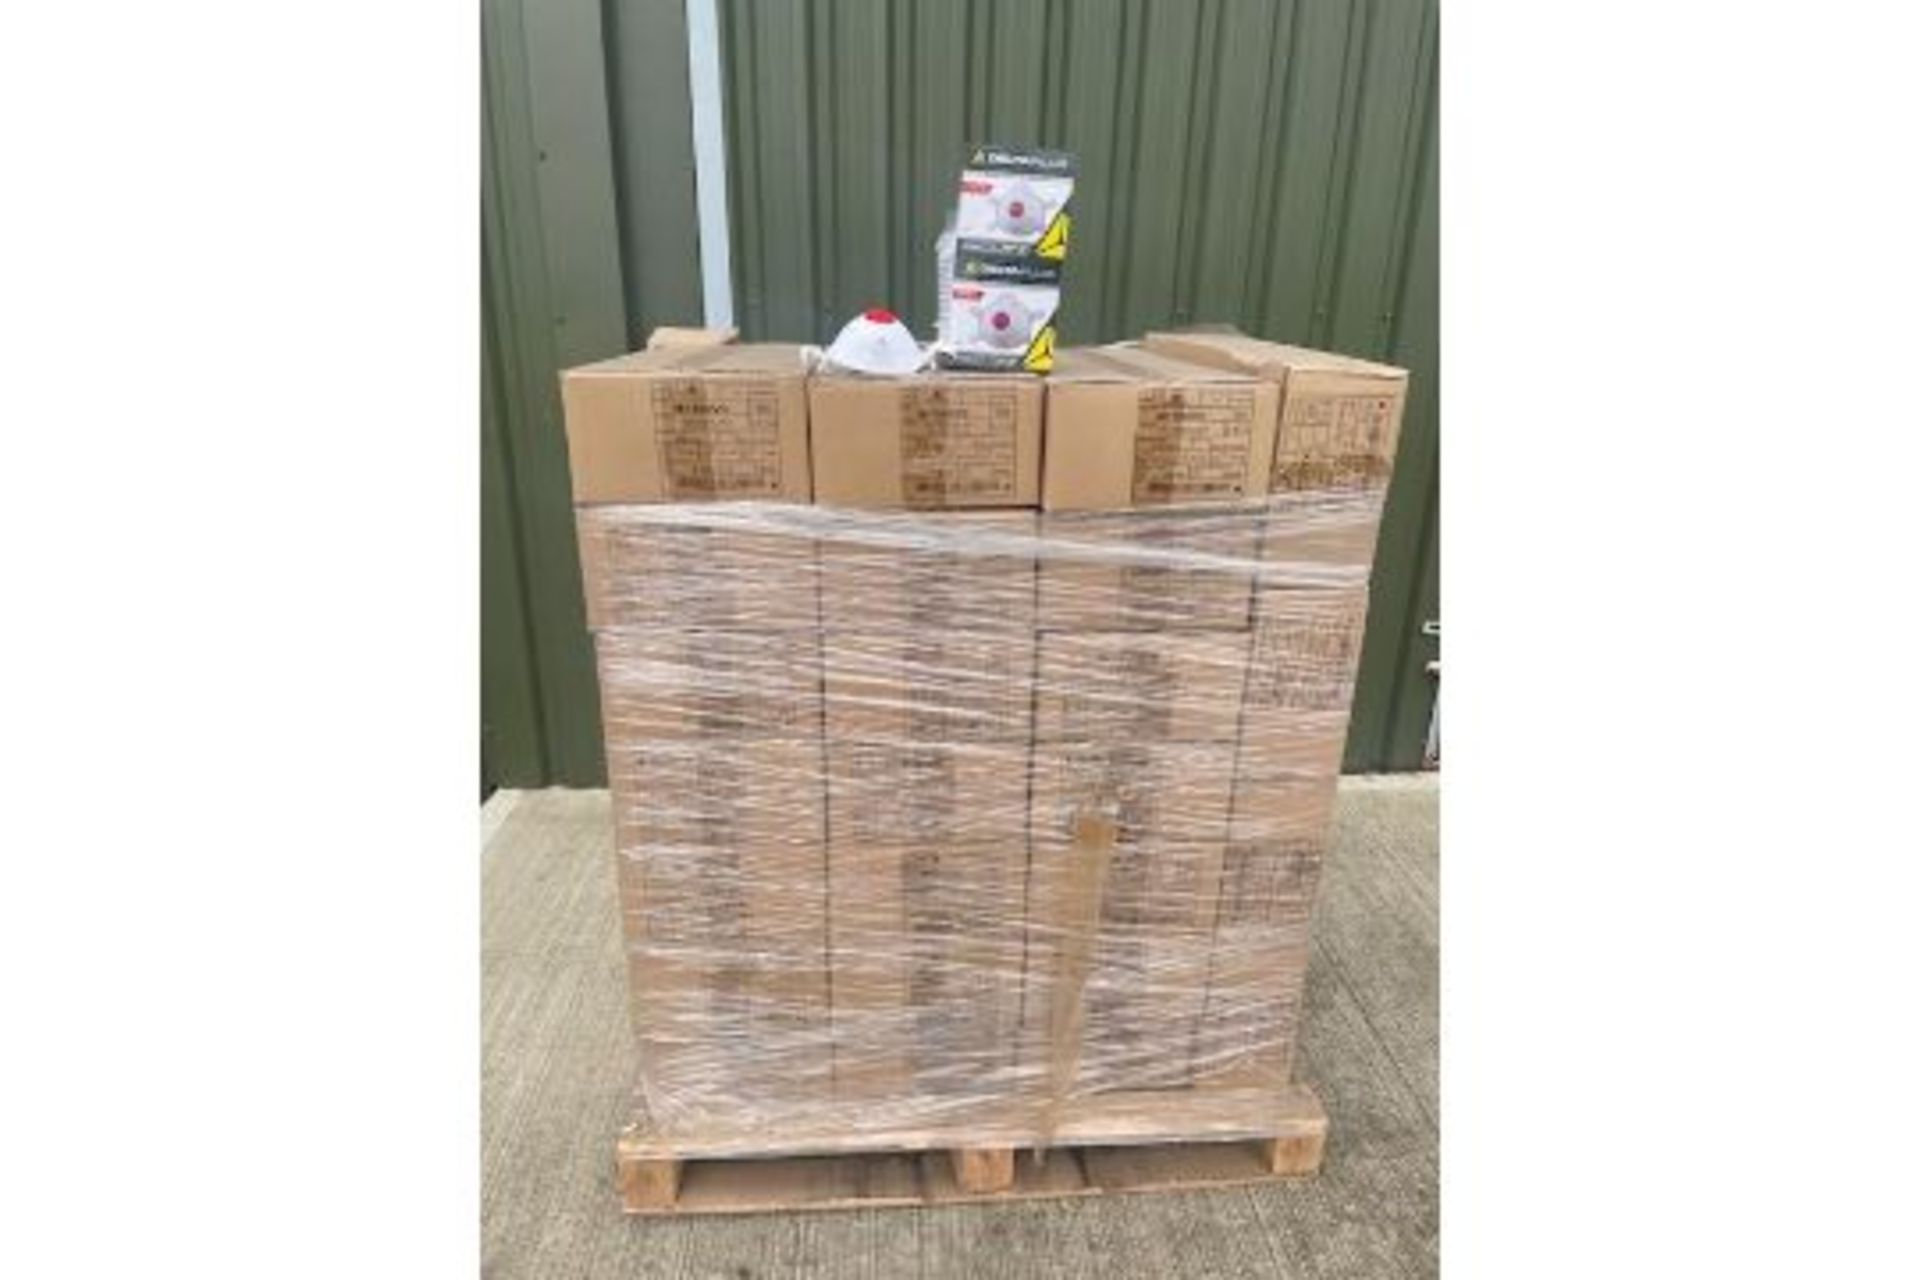 1 PALLET OF 600 NEW UNUSED DELTA PLUS HIGH QUALITY DUST RESPIRATOR MASKS CE MARKED WITH VALVE - Image 2 of 6